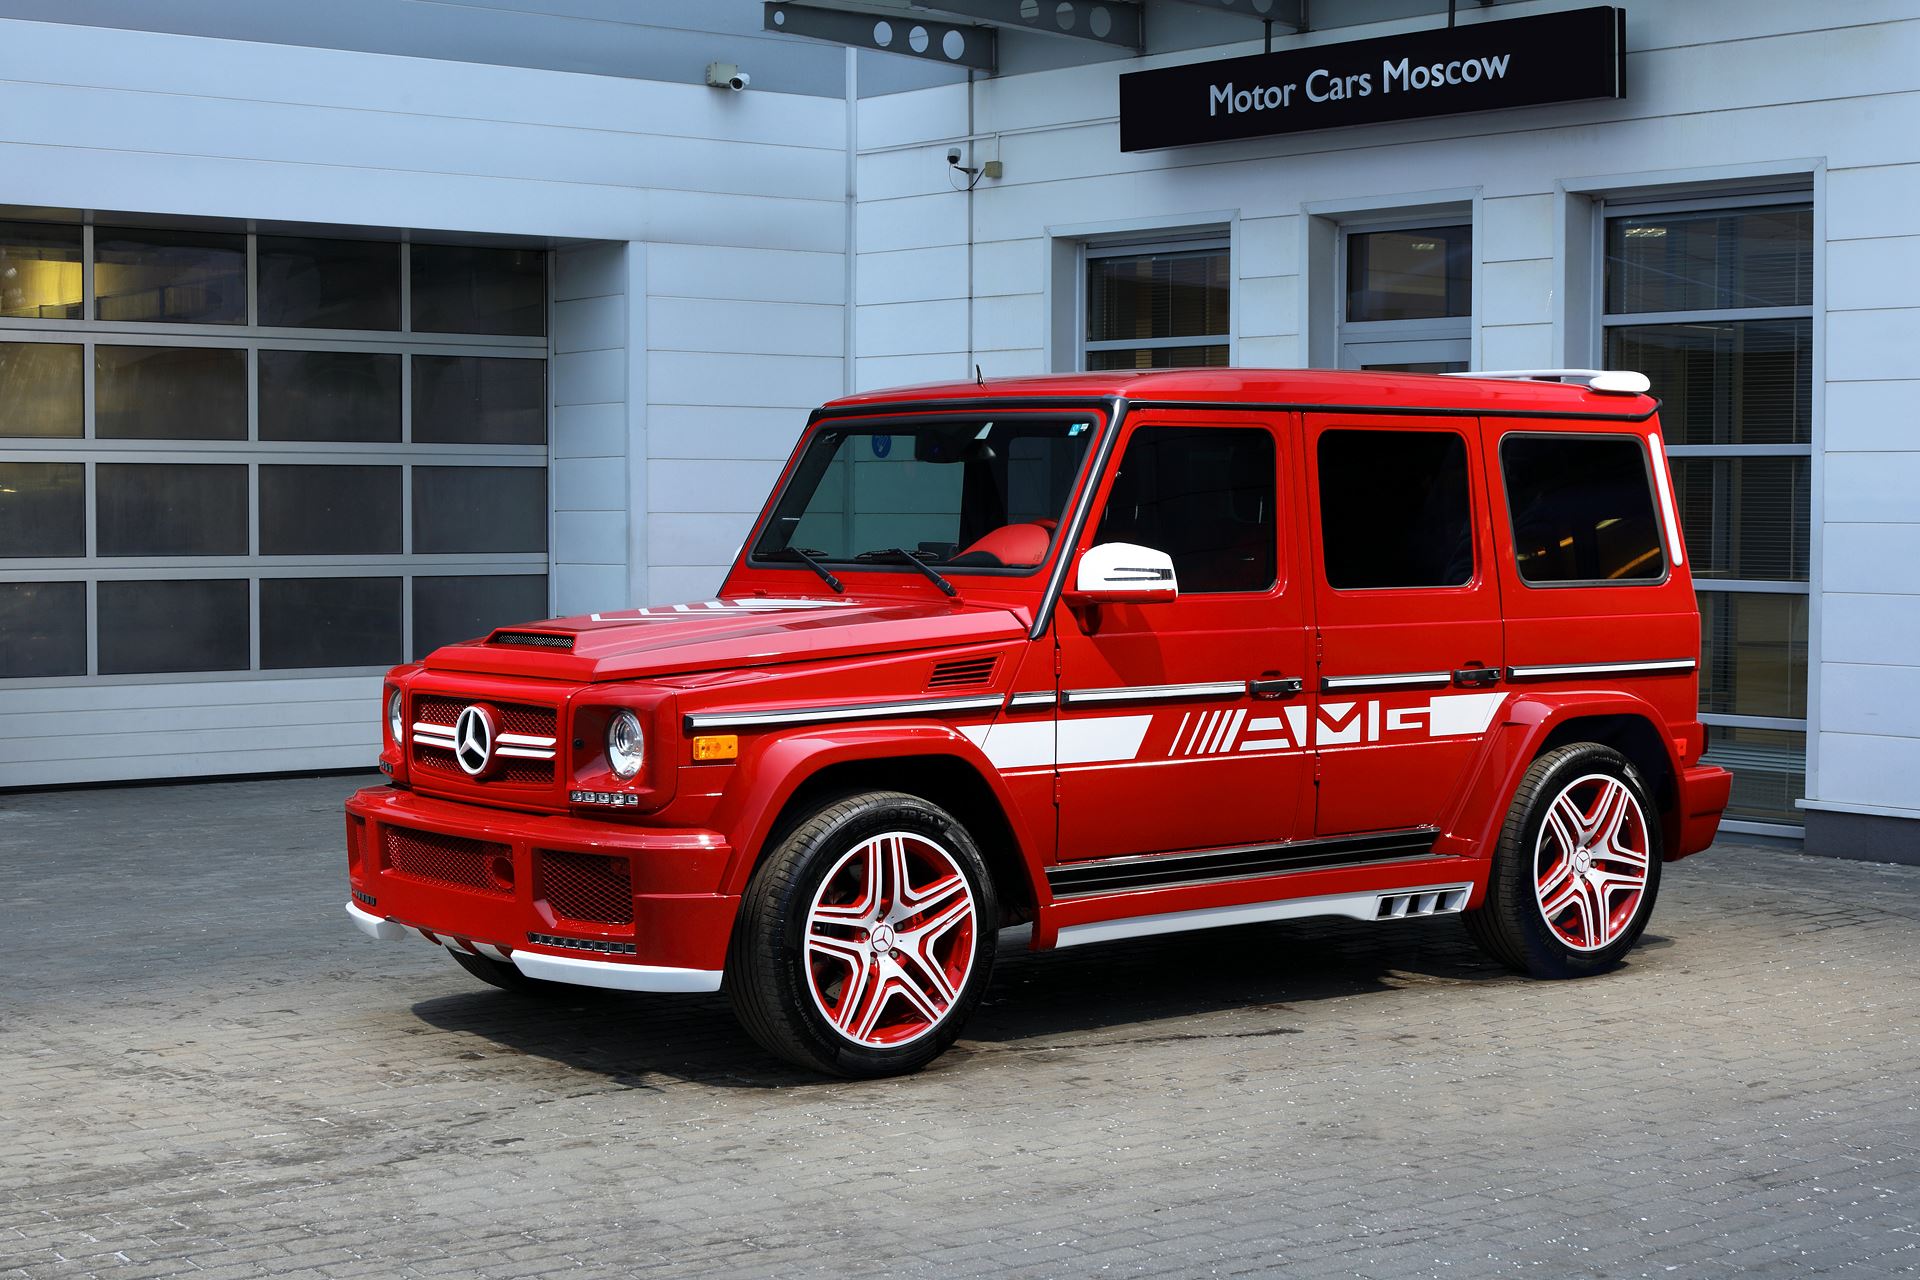 G63 AMG with Hamann Body Kit and Topcar Interior Is a Red Russian Rooster - autoevolution1920 x 1280